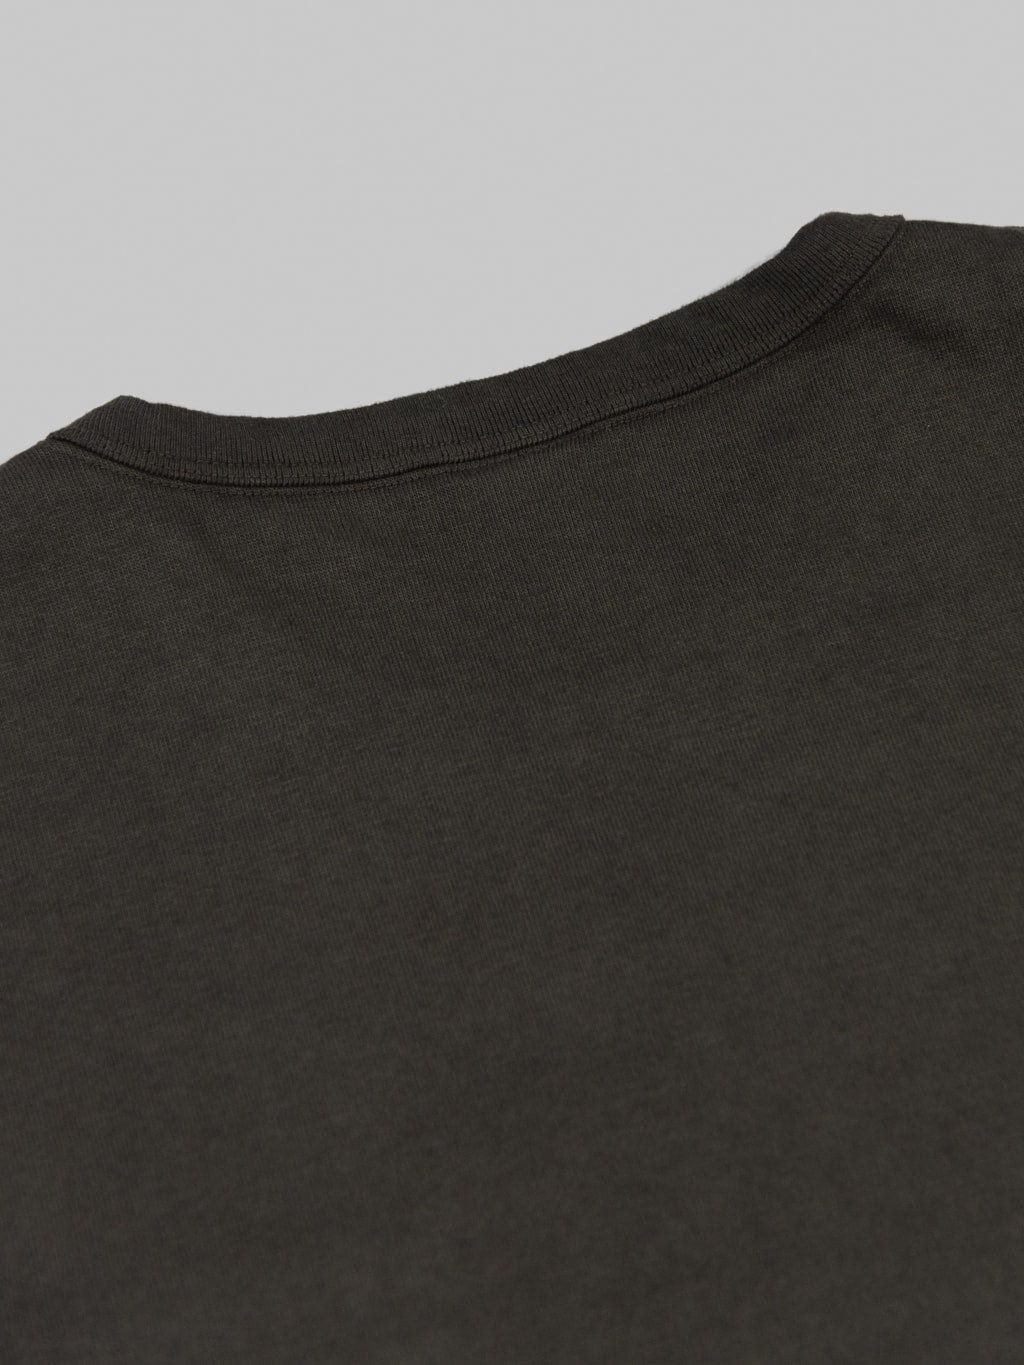 trophy clothing od henley tee black collar stitching